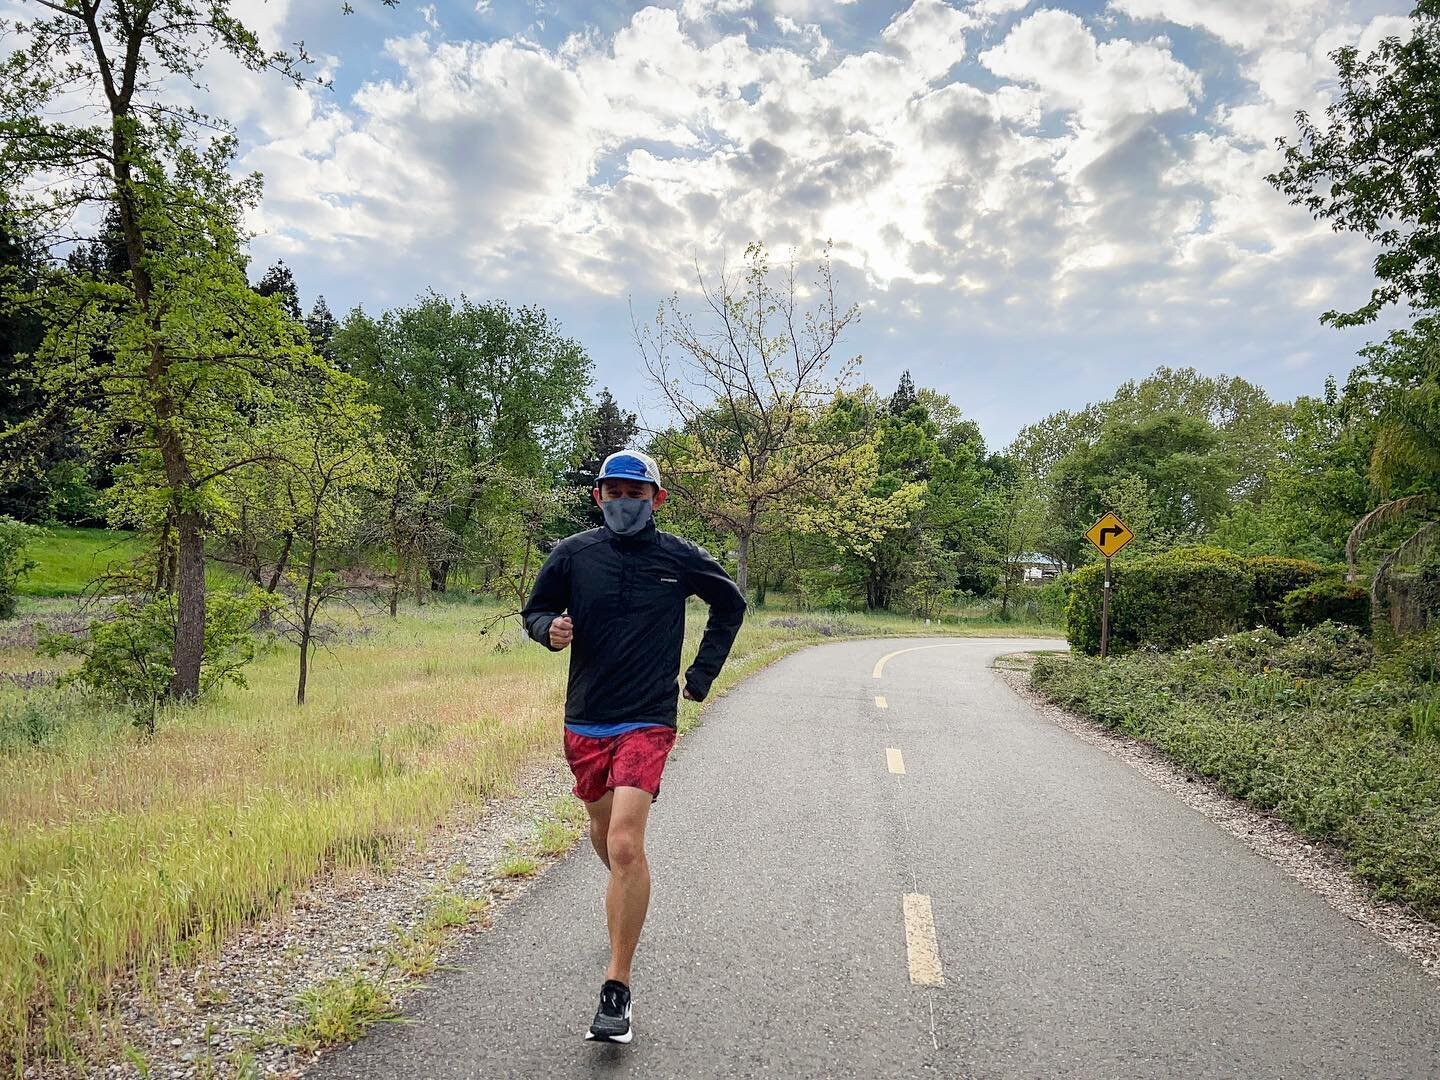 Allergy season is bad enough without the wind, cue in the mask and sunglasses!  LOL but seriously it helps. 

Any other seasonal allergy sufferers out there?  Tips or tricks that help you with outdoors runs during this time?